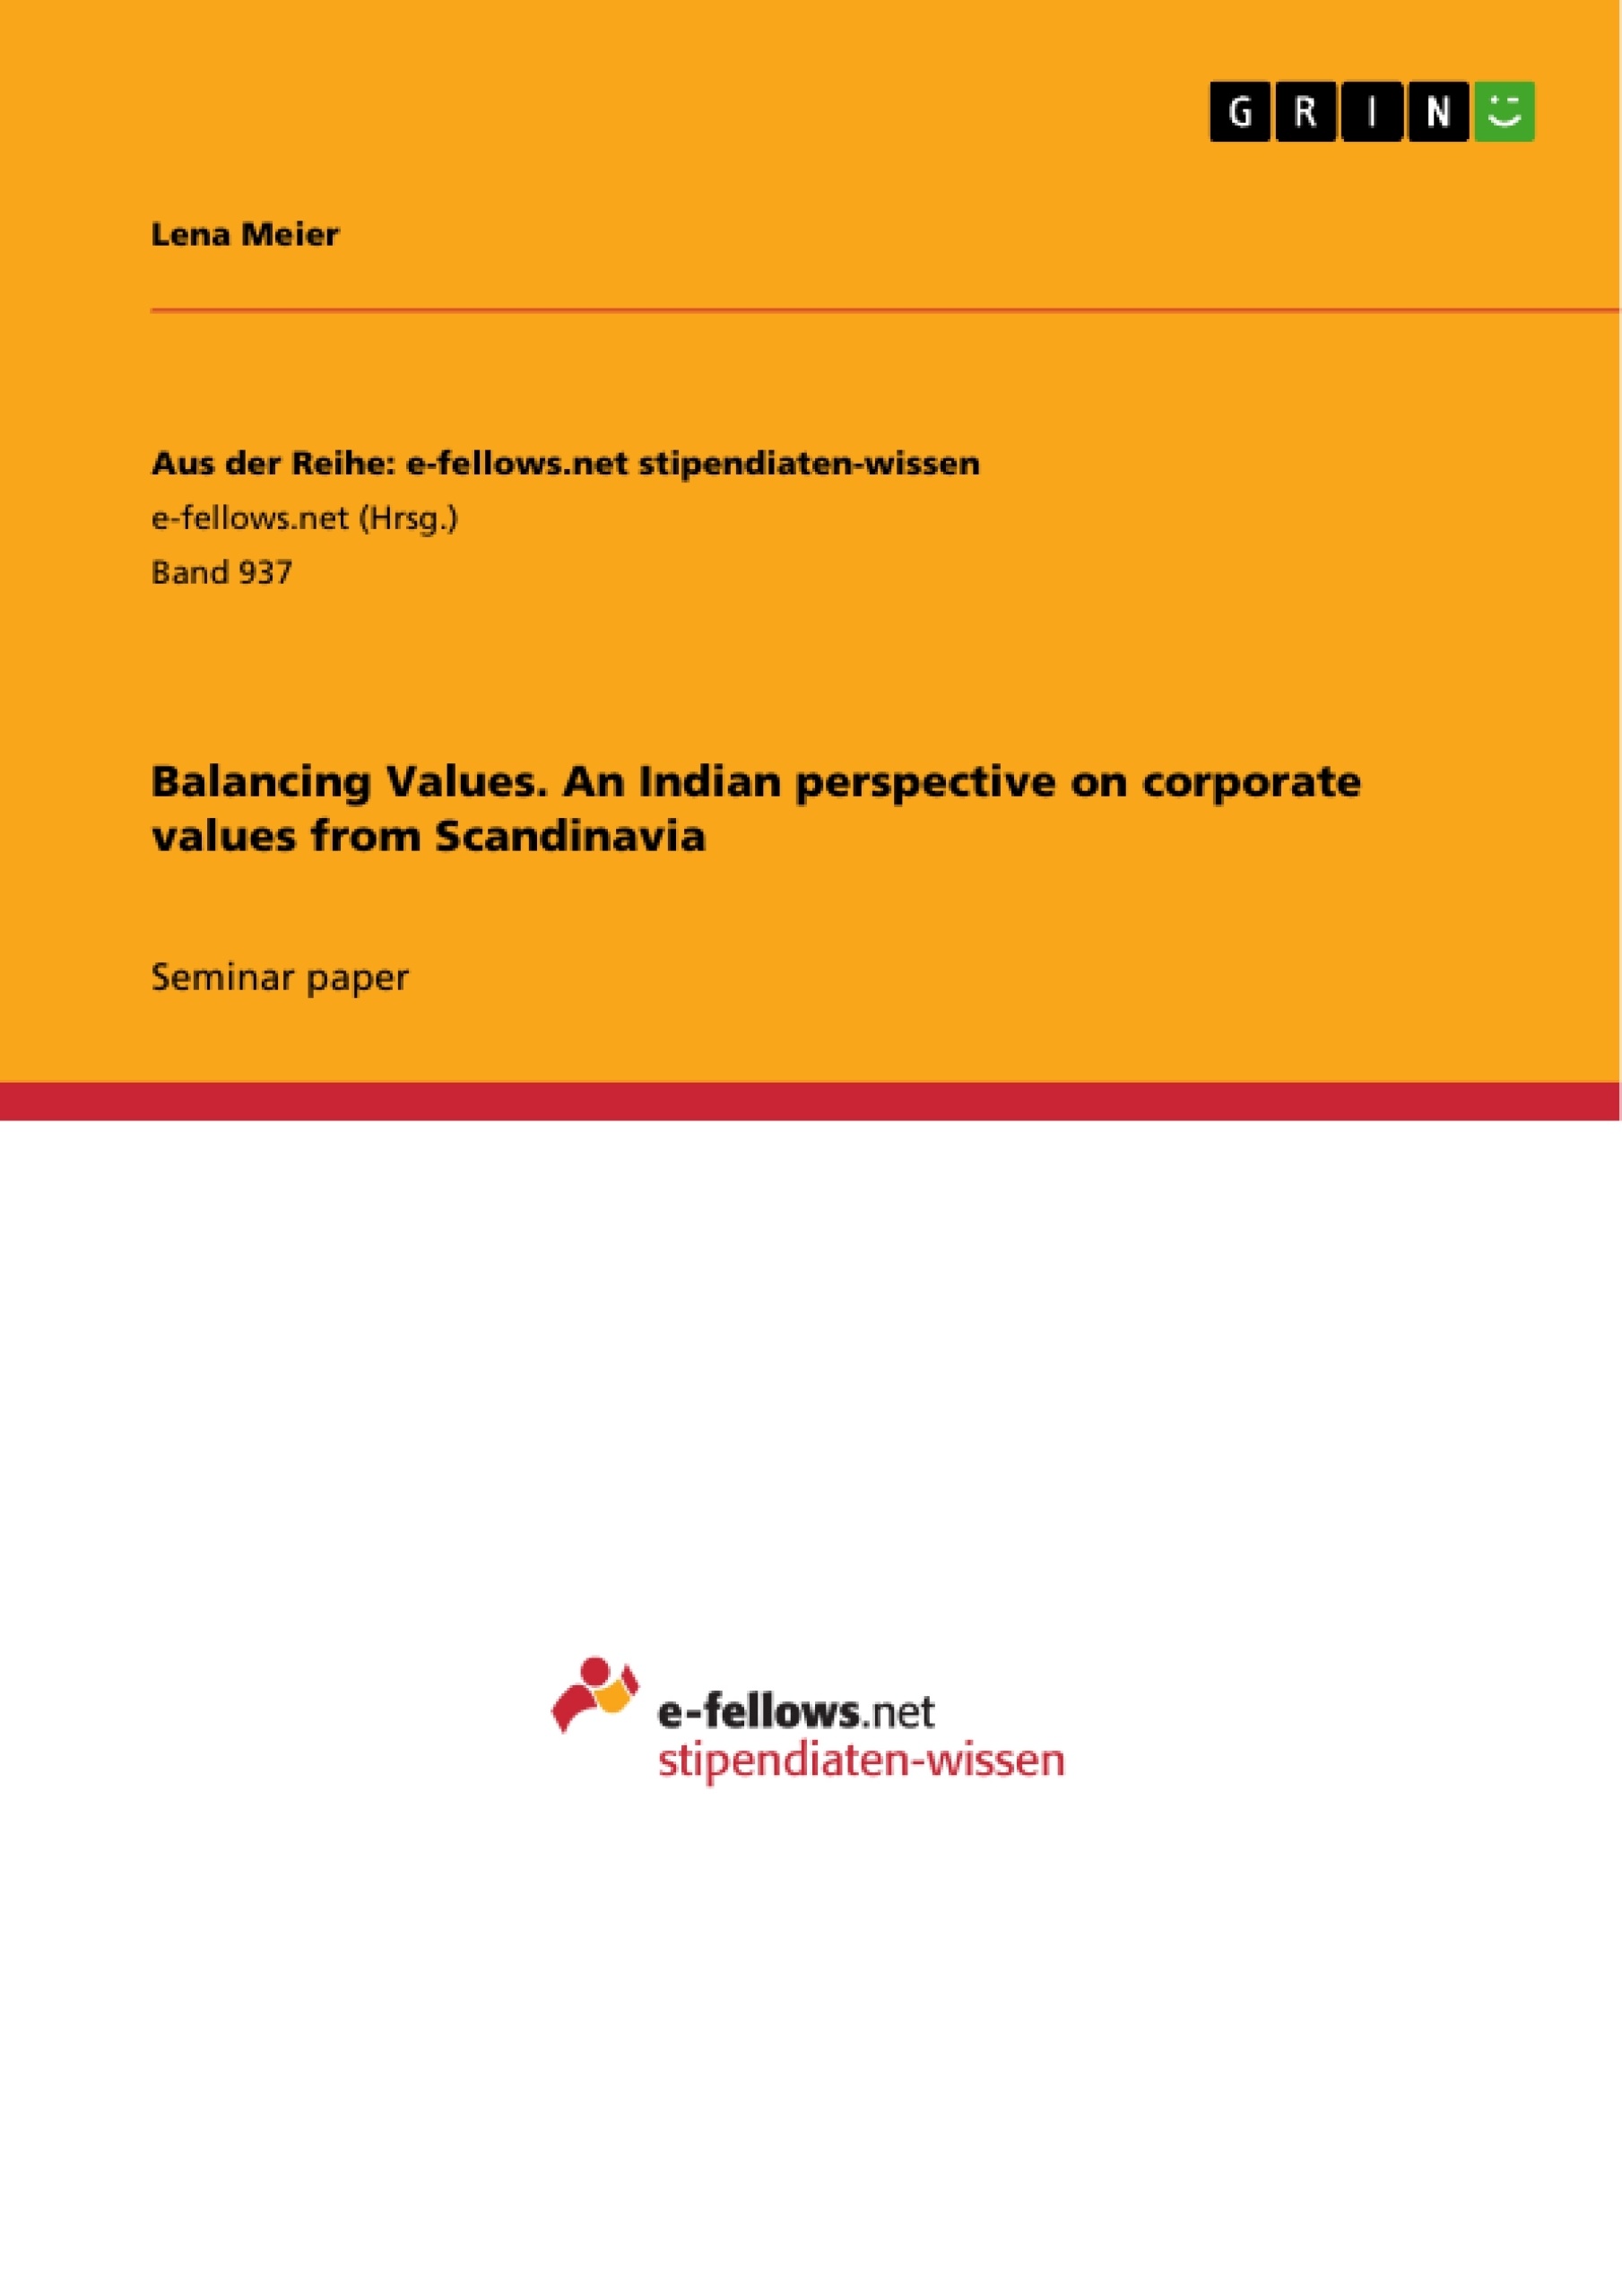 Title: Balancing Values. An Indian perspective on corporate values from Scandinavia